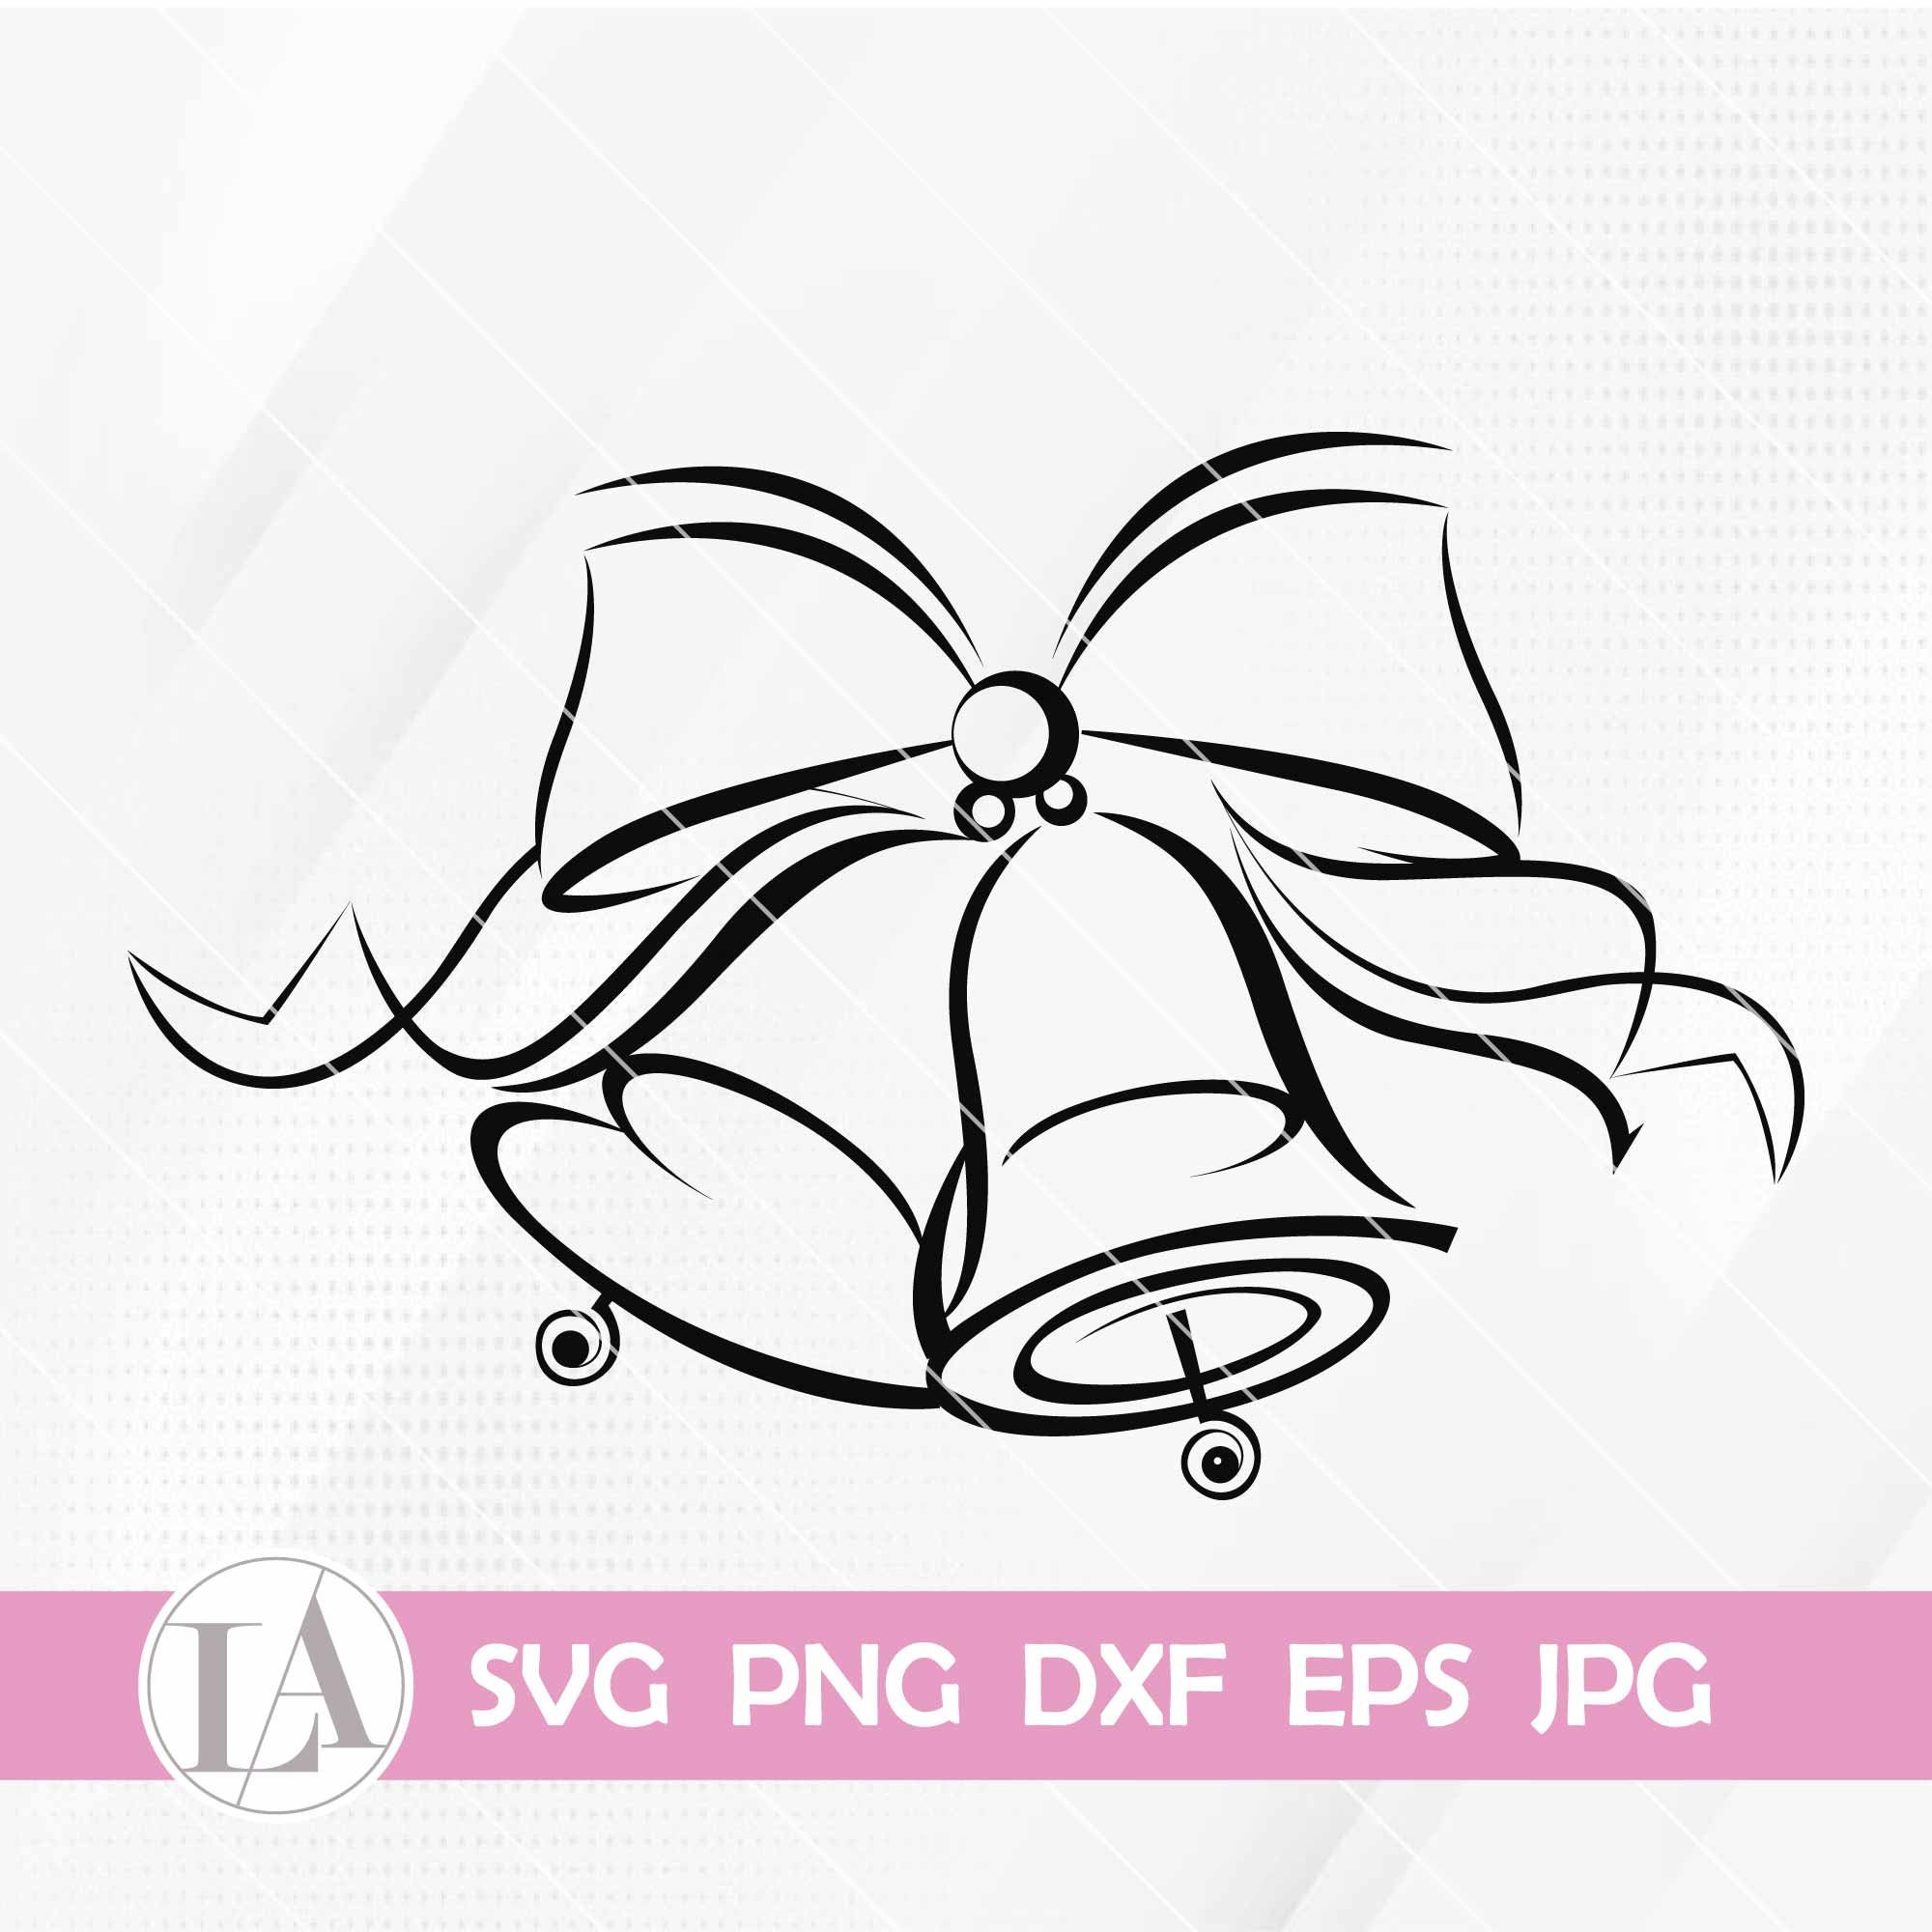 What Is a PNG File?  Wedding bells clip art, Bridal flower clips, Wedding  clipart free